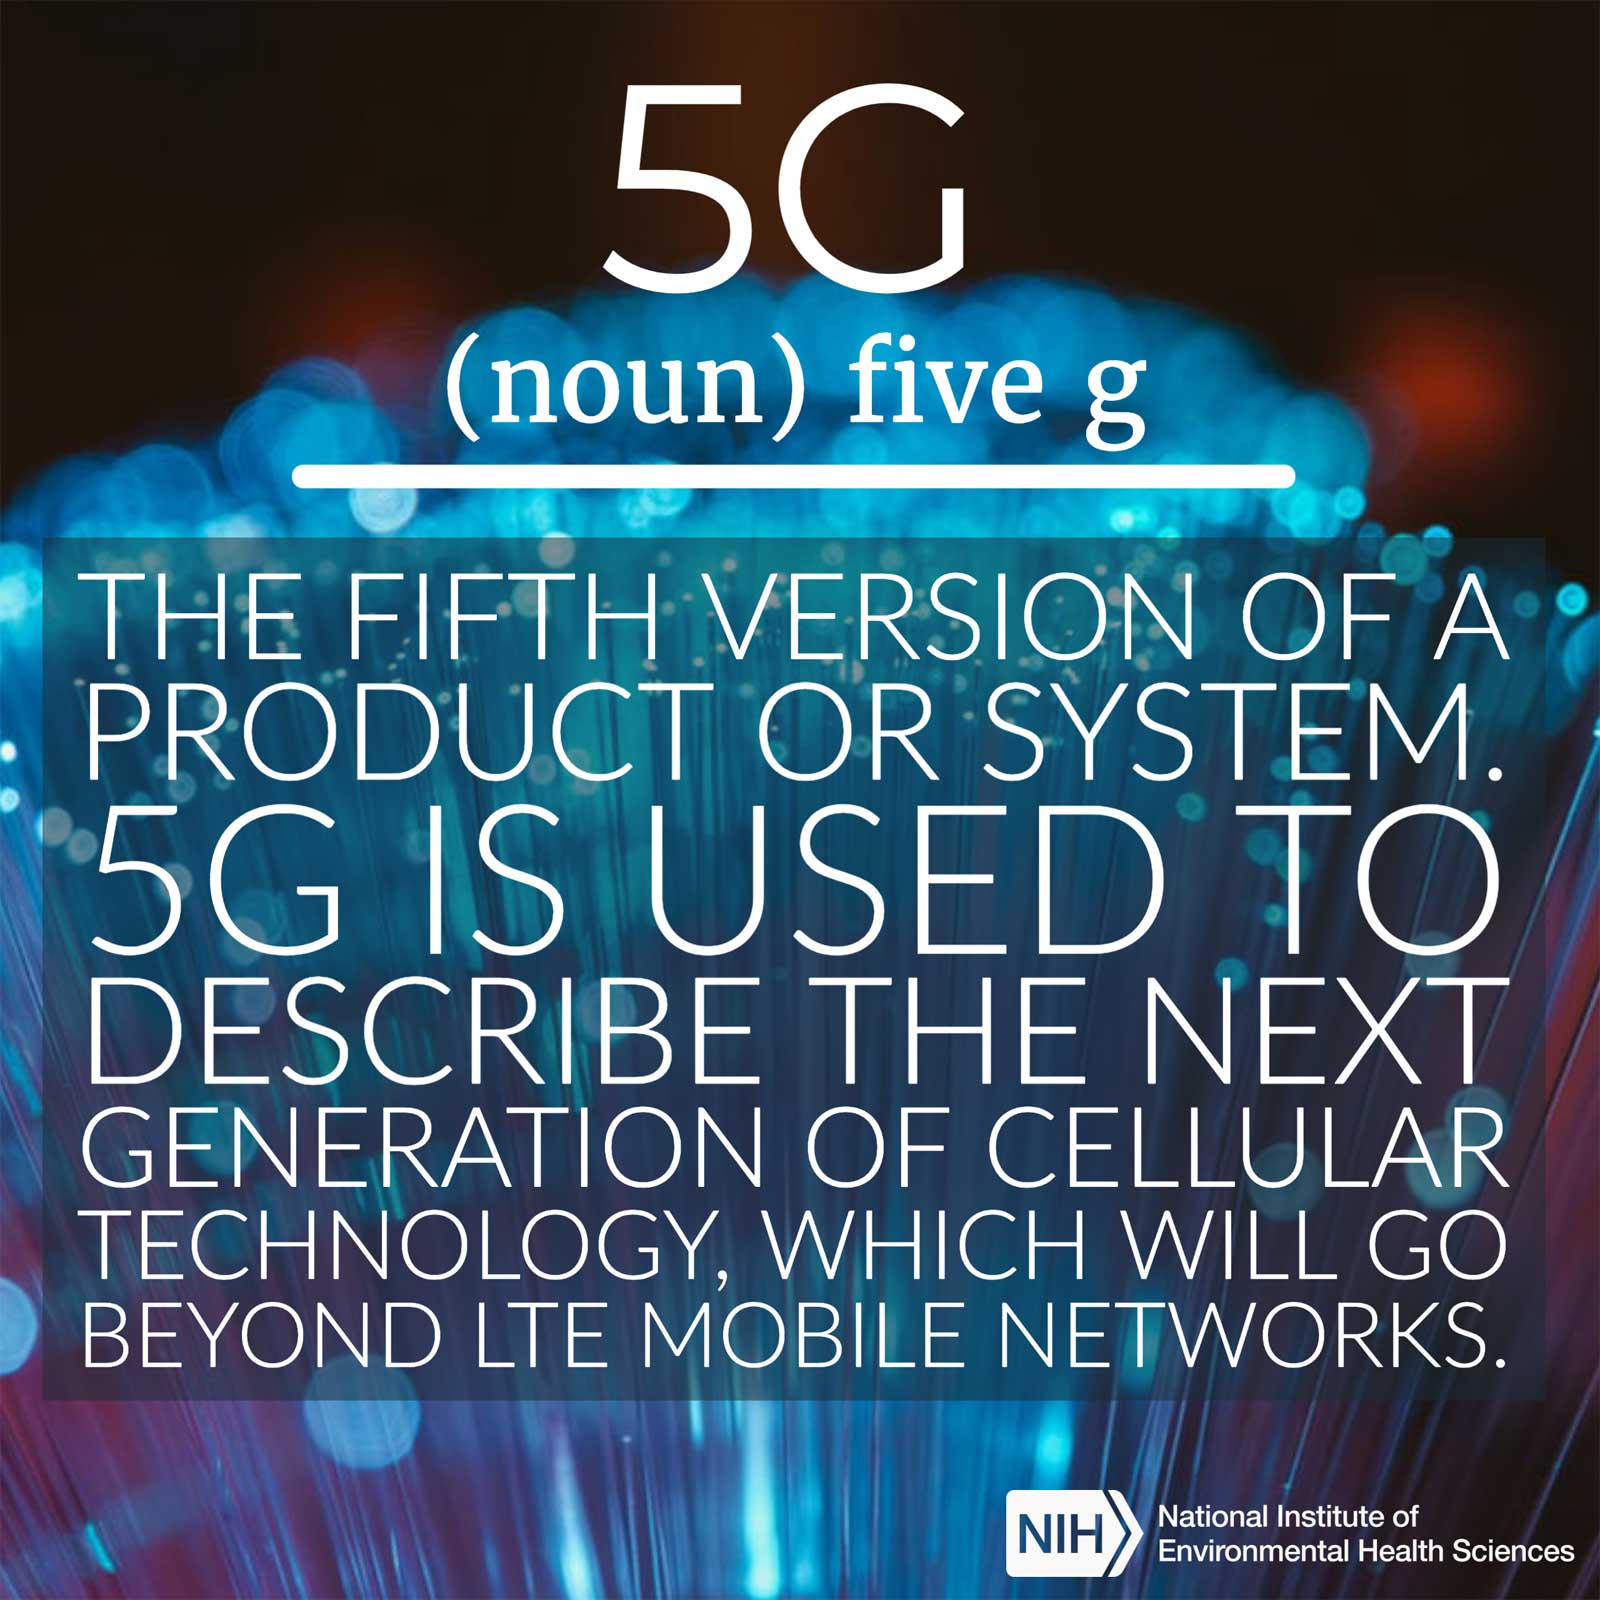 5G (noun) defined as 'the fifth version os a product or system. 5G is used to describe the next generation of cellular technology, which will go beyond LTE mobile networks'